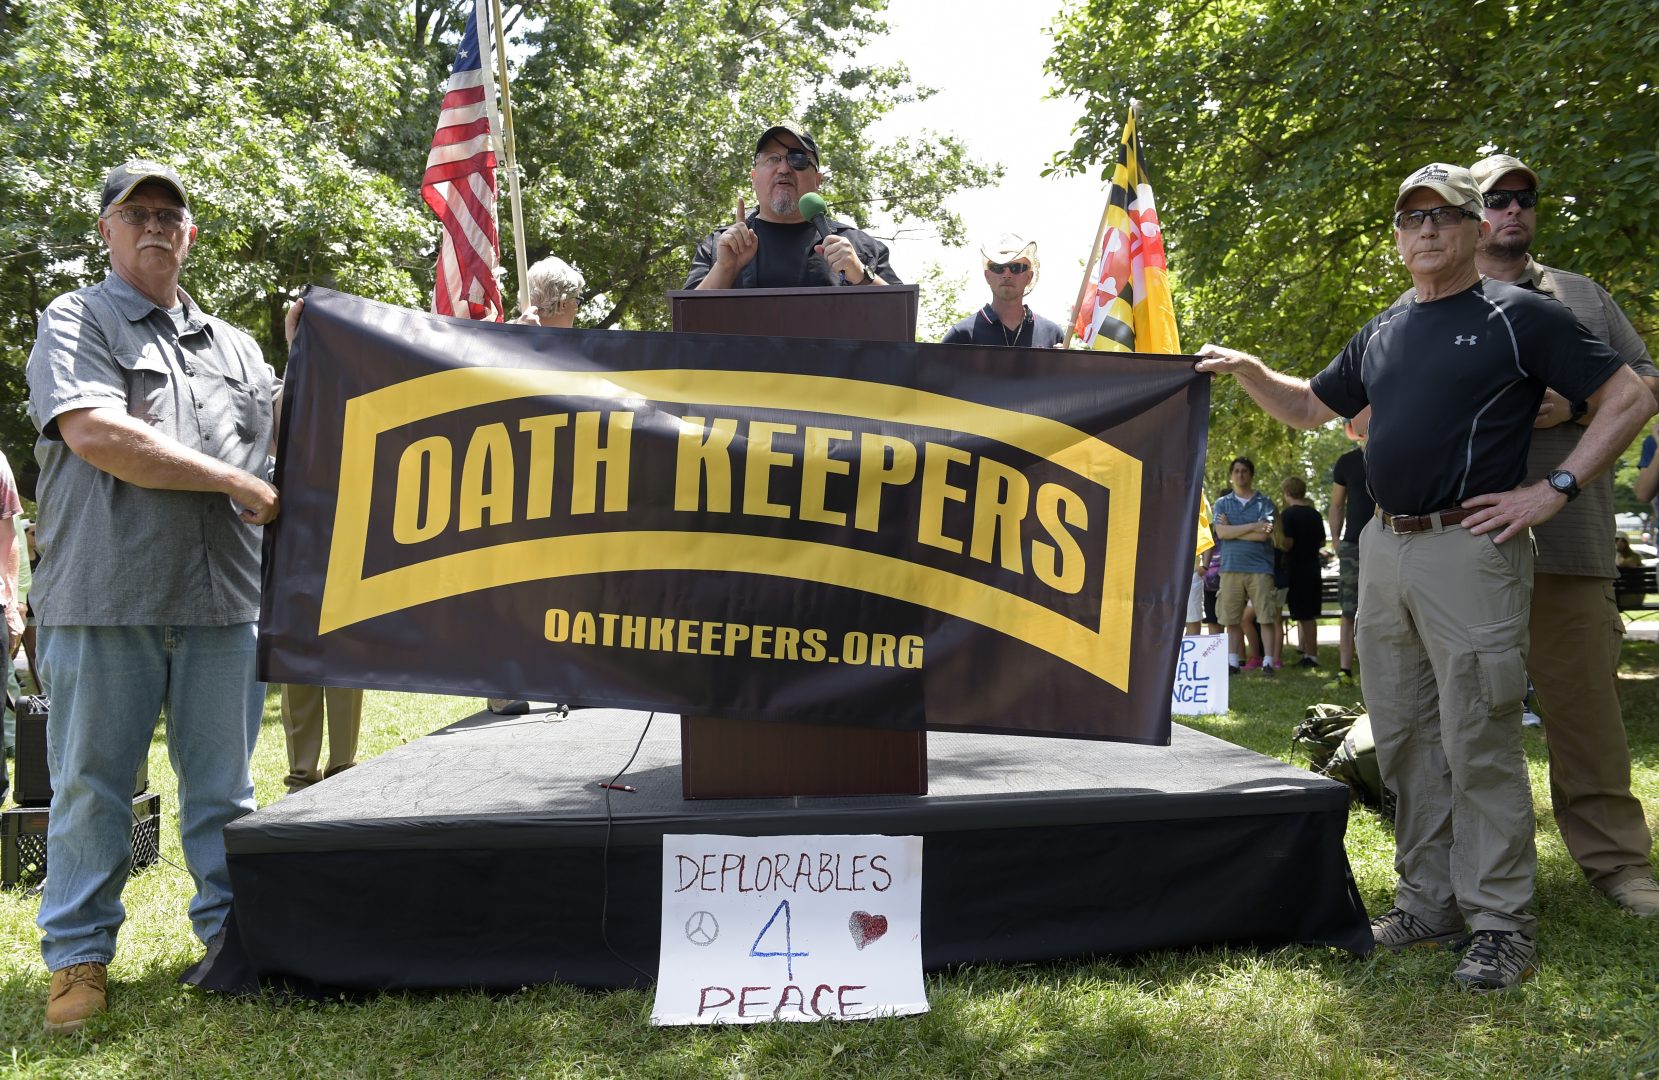 Stewart Rhodes, founder of the citizen militia group known as the Oath Keepers, center, speaks during a rally outside the White House in Washington, Sunday, June 25, 2017.